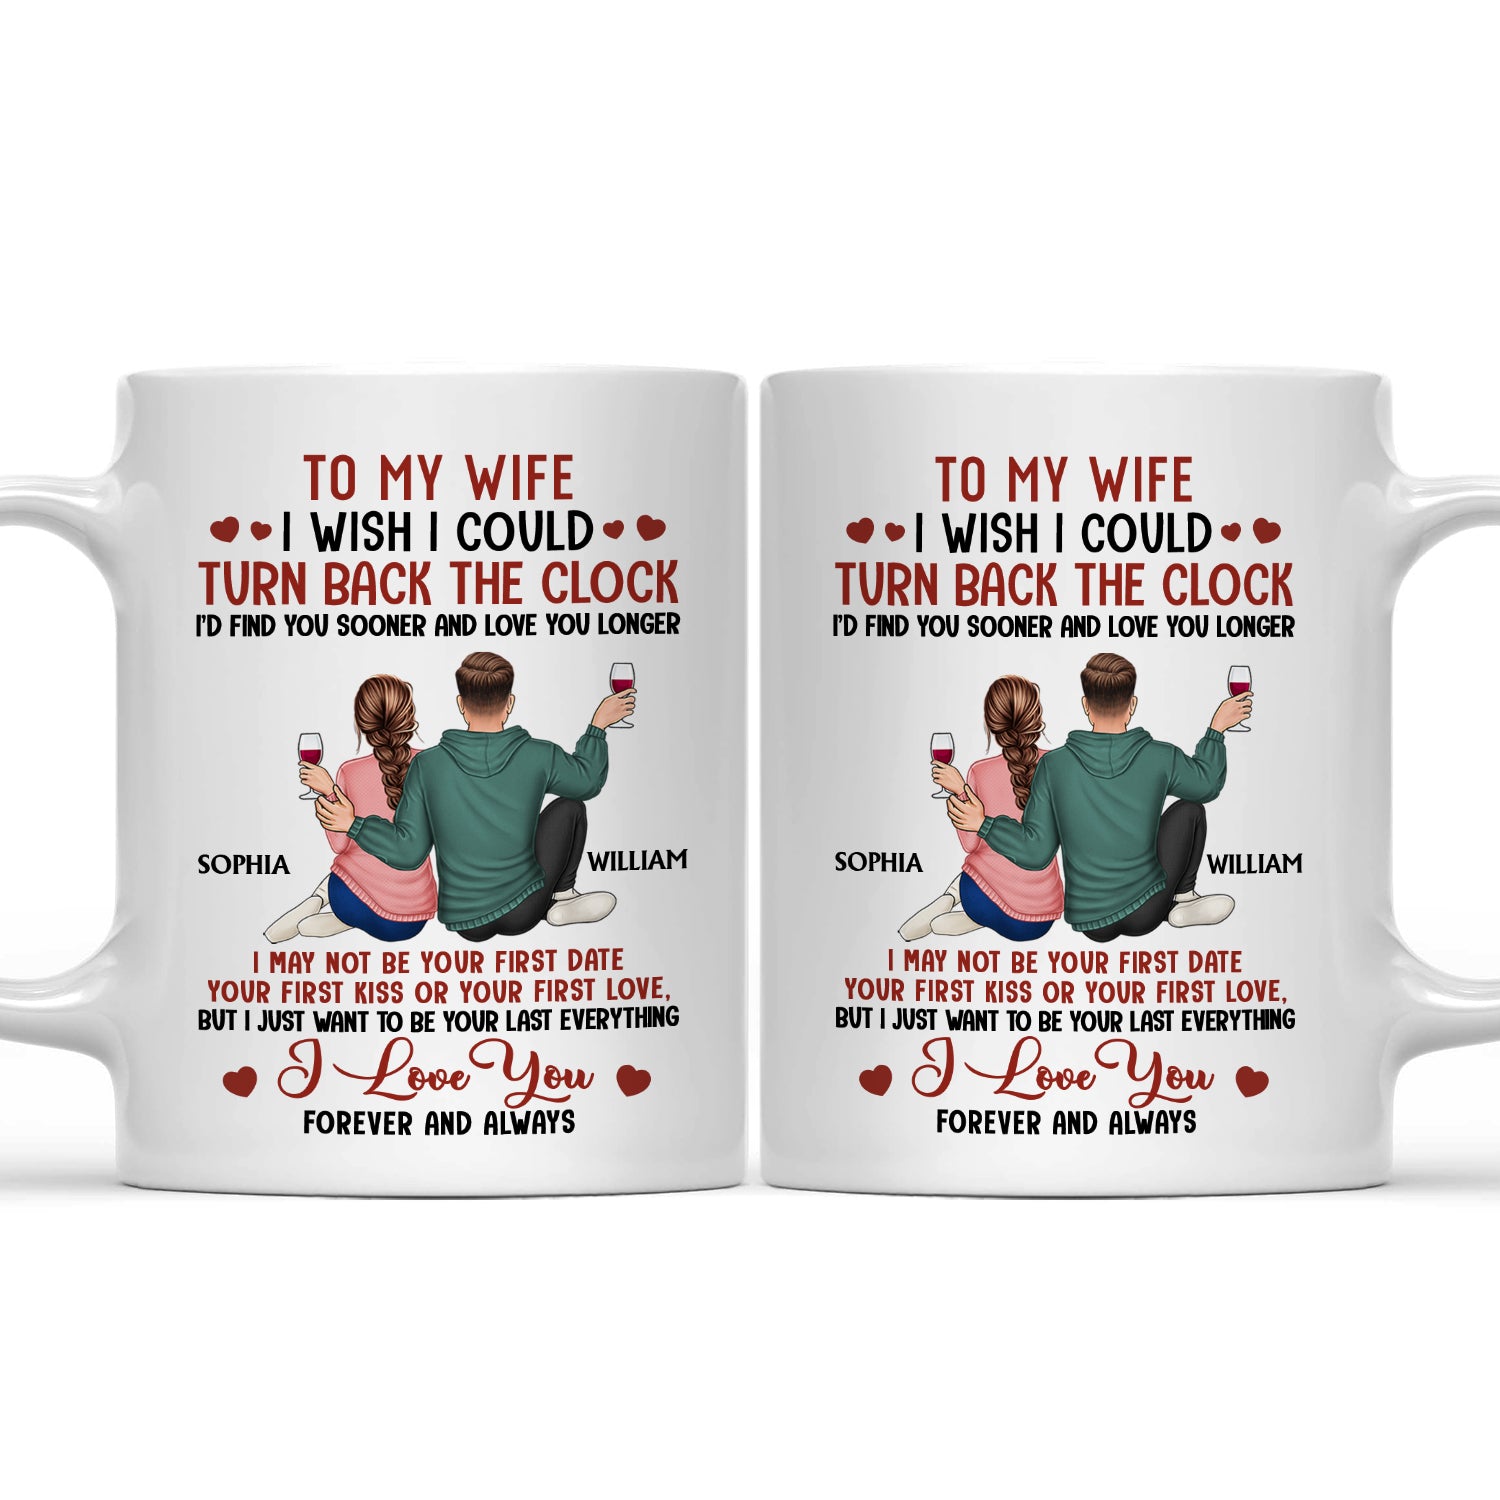 I Wish I Could Turn Back The Clock - Anniversary, Loving Gift For Couples, Husband, Wife - Personalized Mug